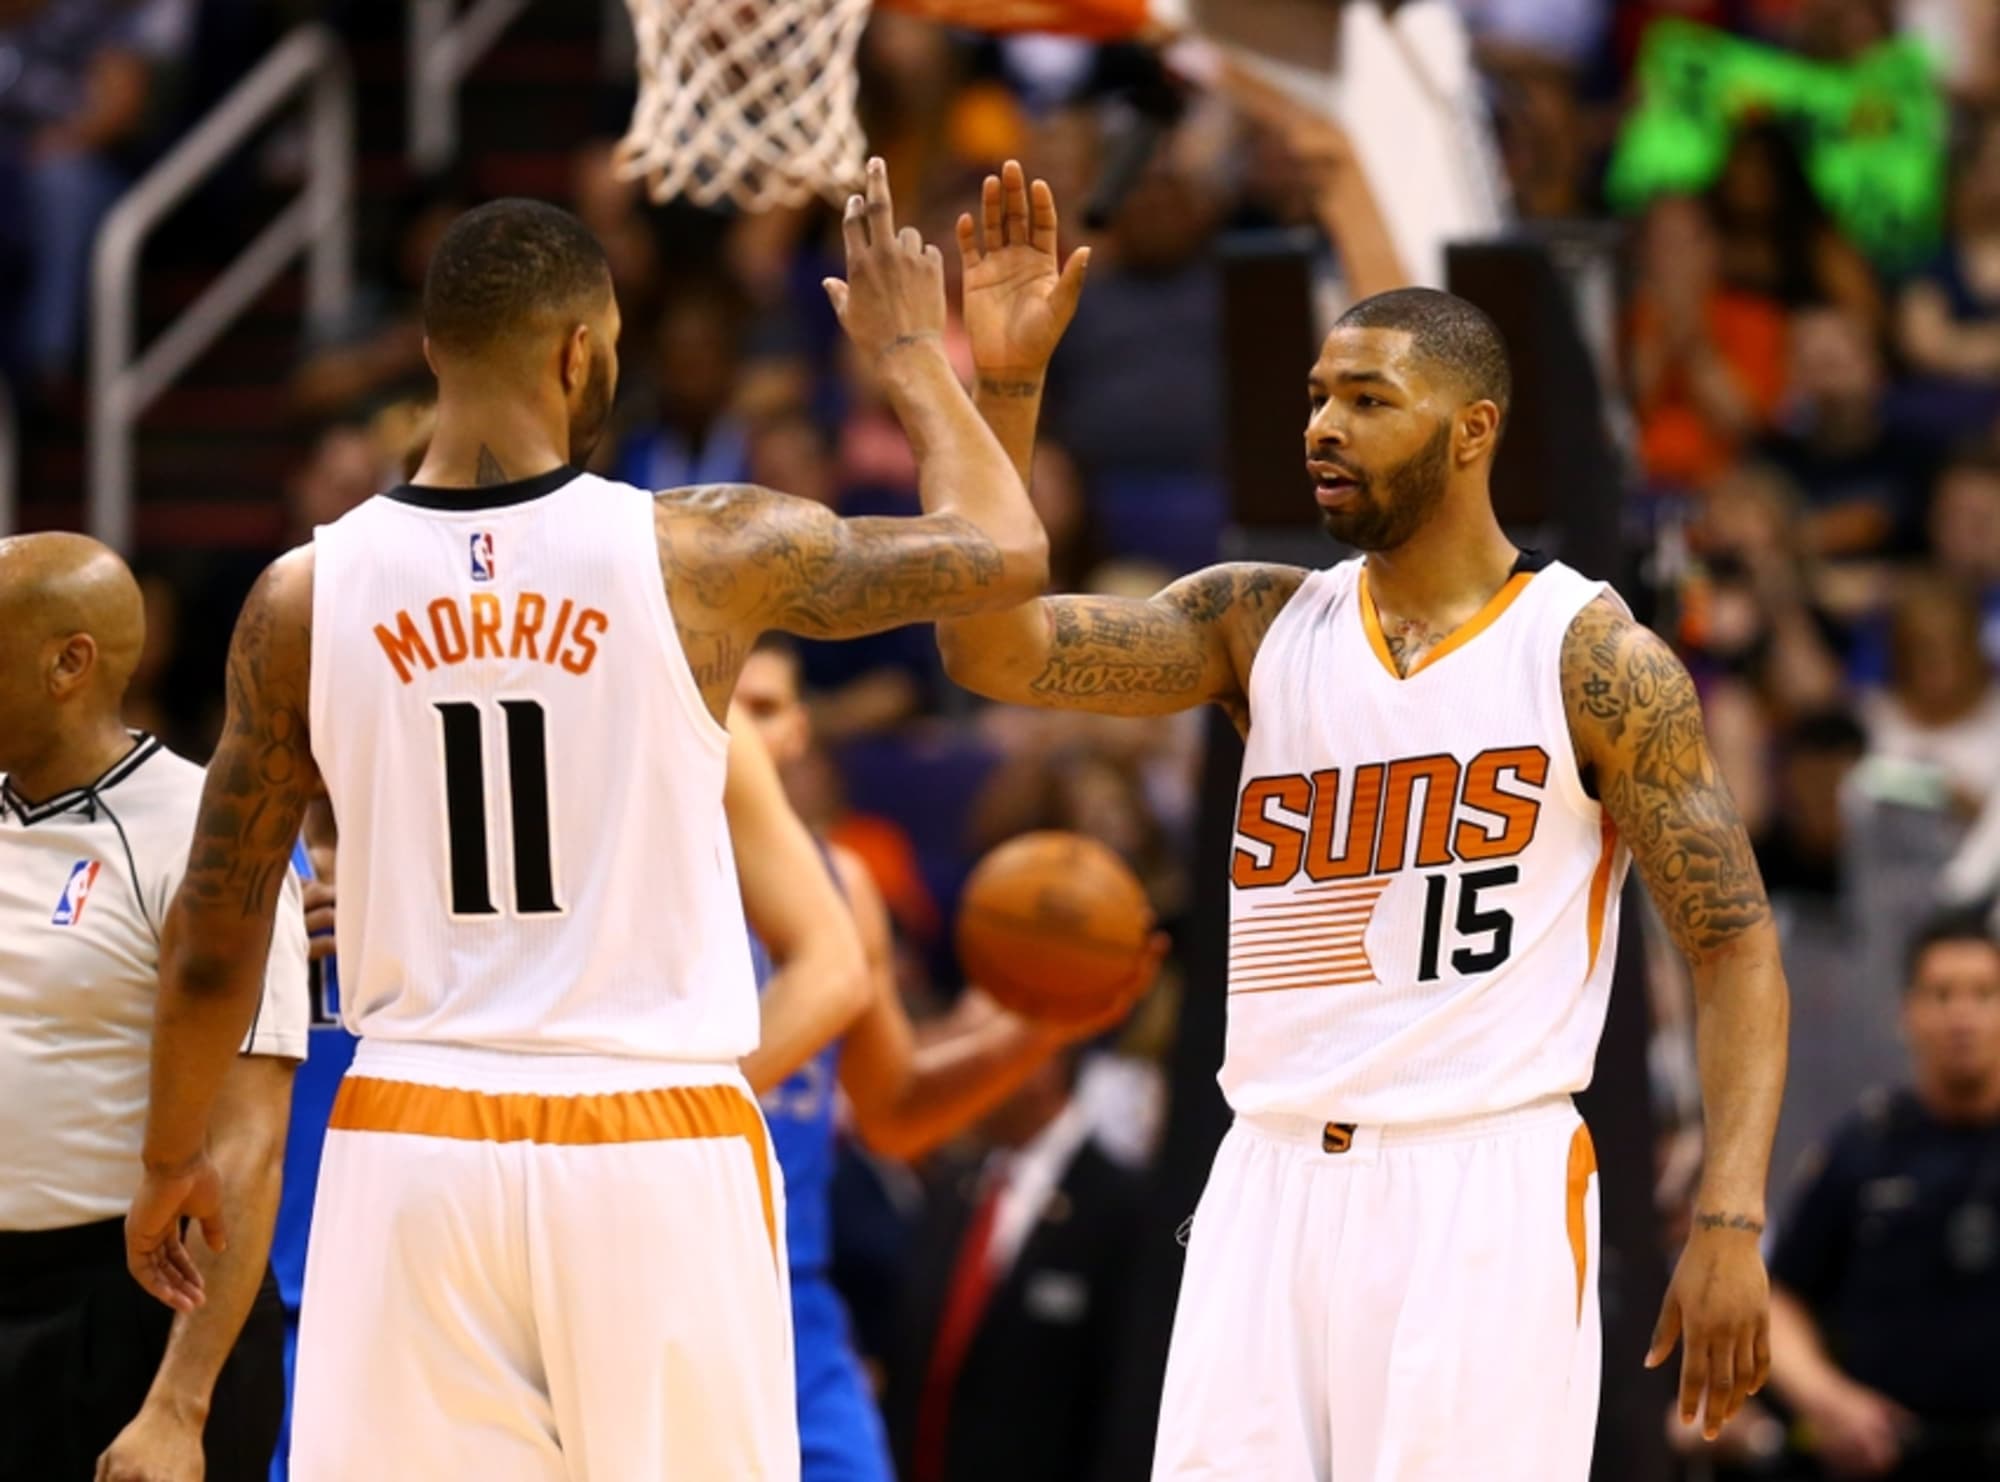 Markieff and Marcus Morrises Are Suns and Brothers - The New York Times